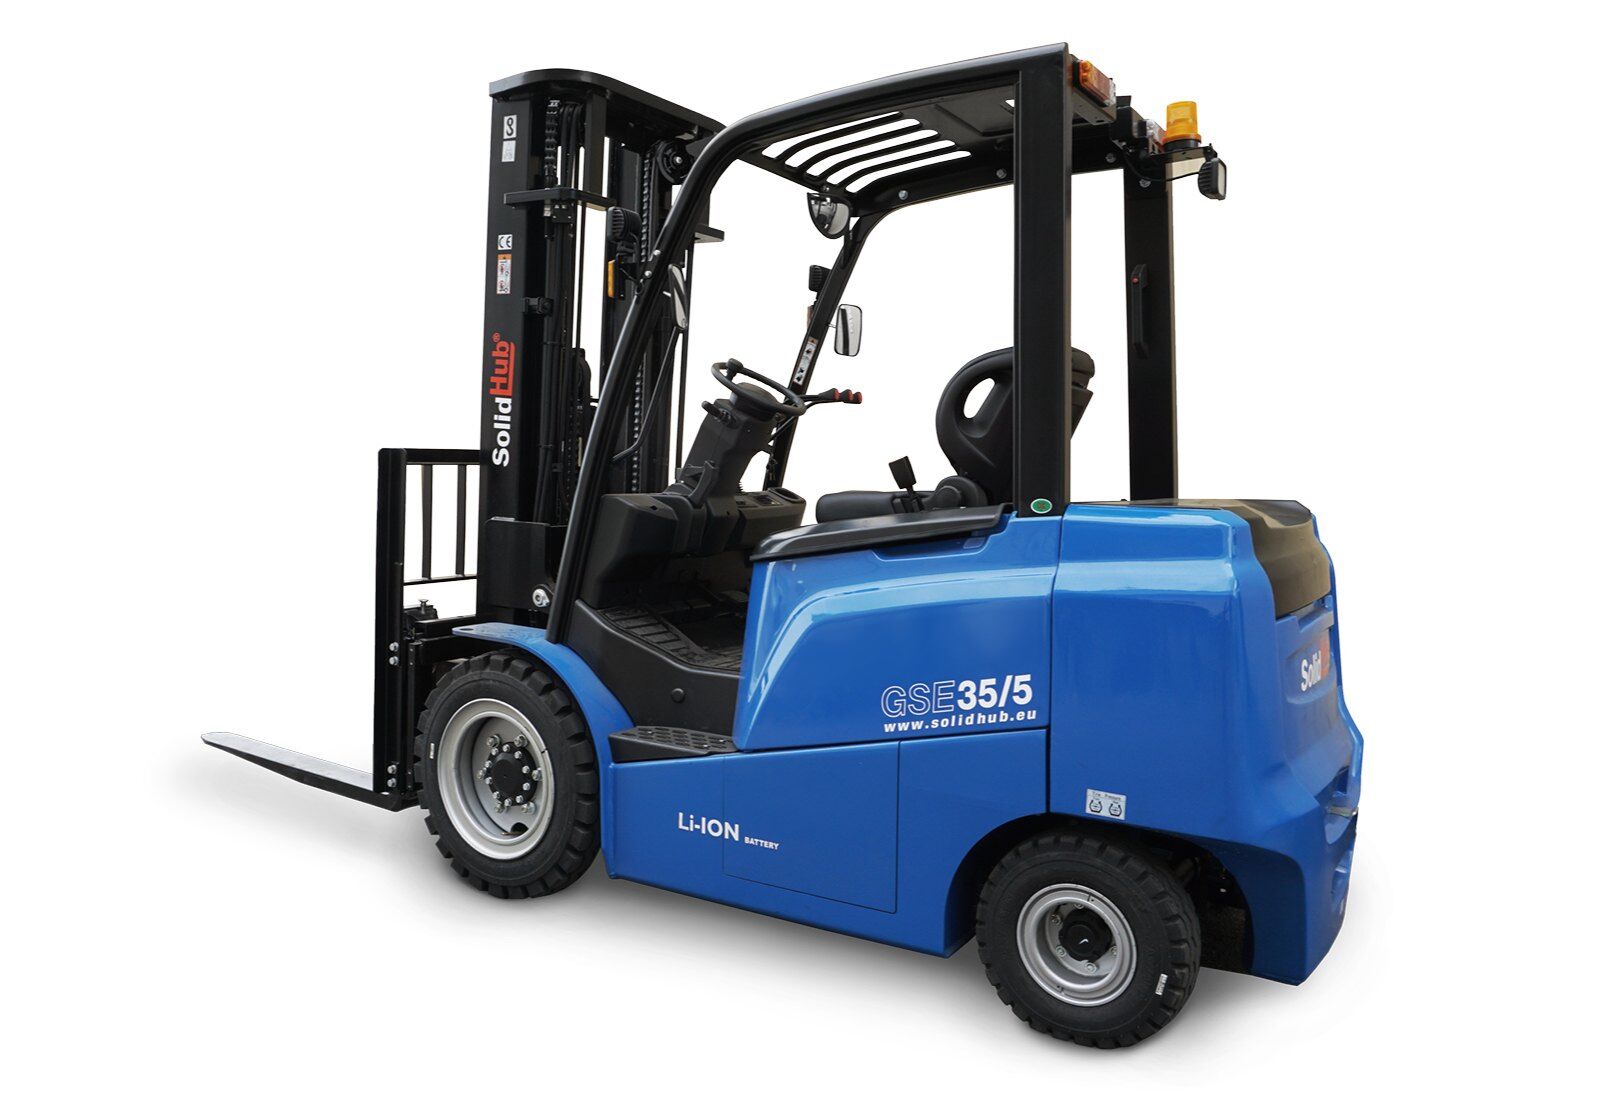 LI-ION Electric Forklift GSE35/5 incl. charger, load capacity 7,716 lbs,  SolidHub